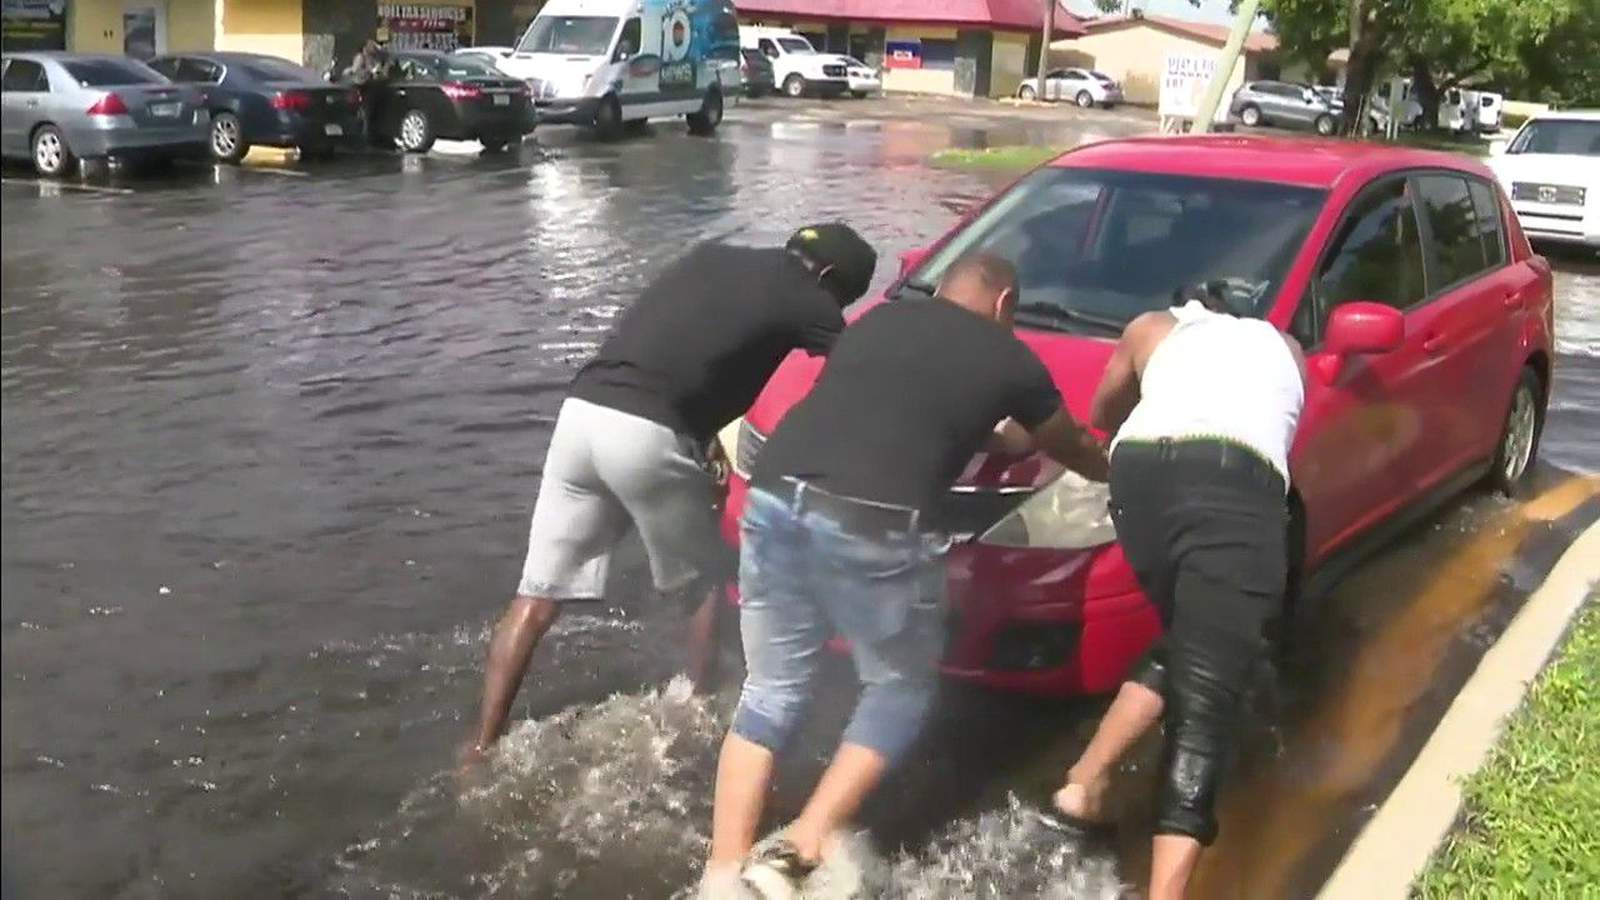 Stranded cars, sidewalk hot plates, and plenty of water in Lauderhill